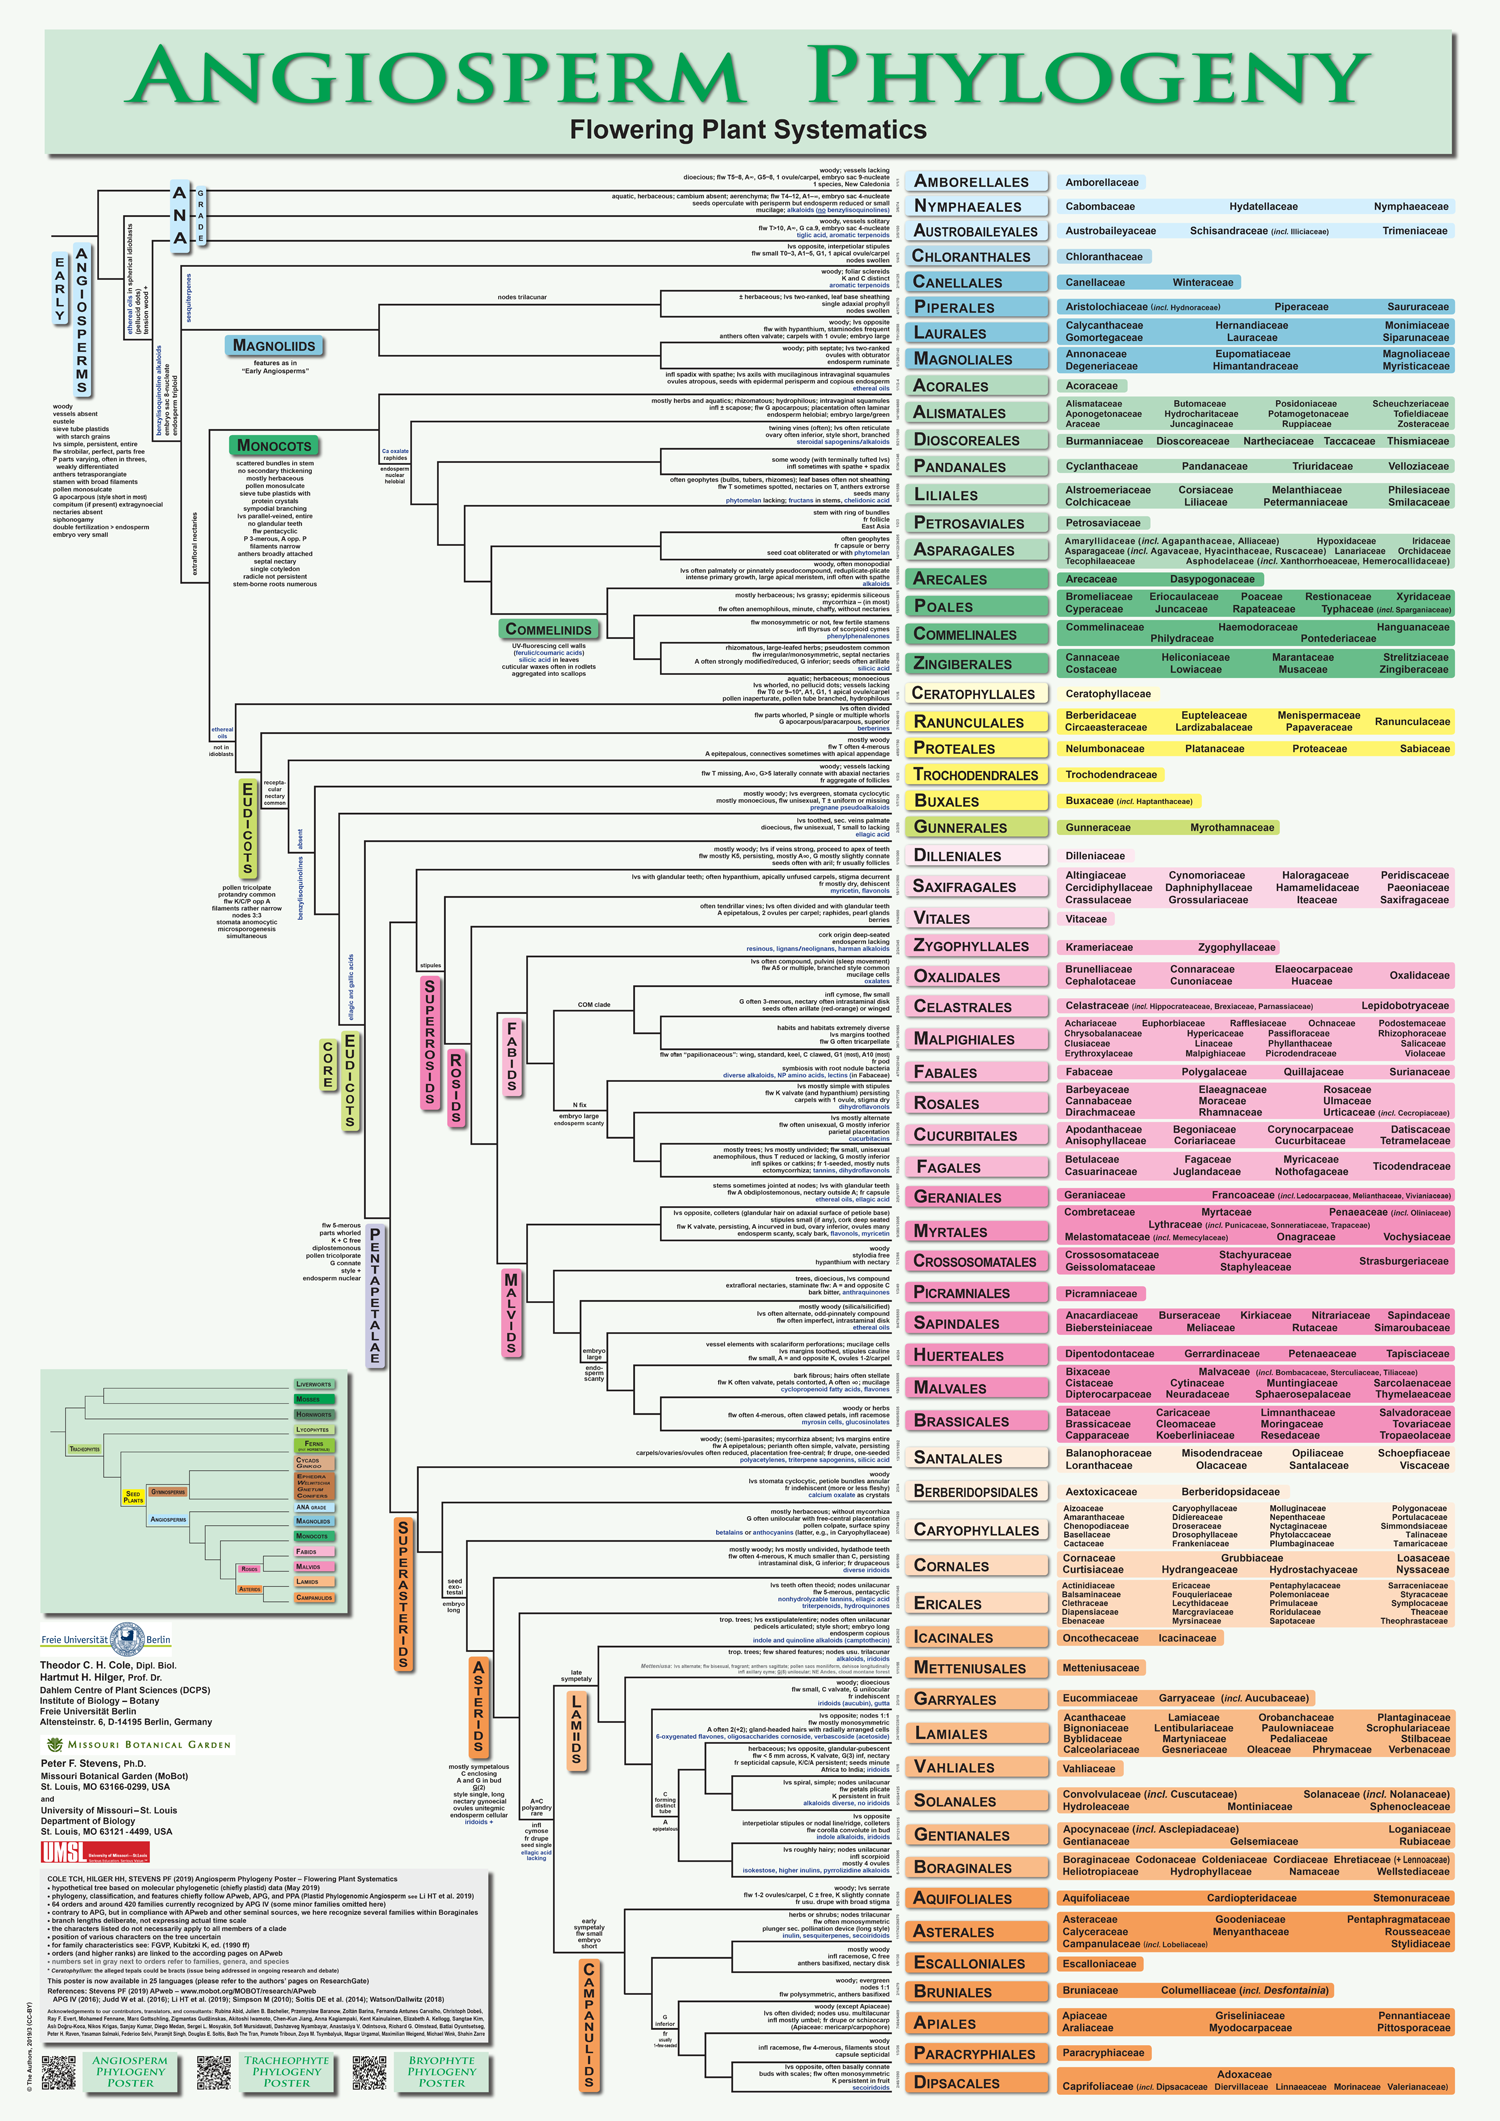 Poster showing tree of angiosperm relationships and classification. See the citation in the figure caption for a downloadable PDF version.